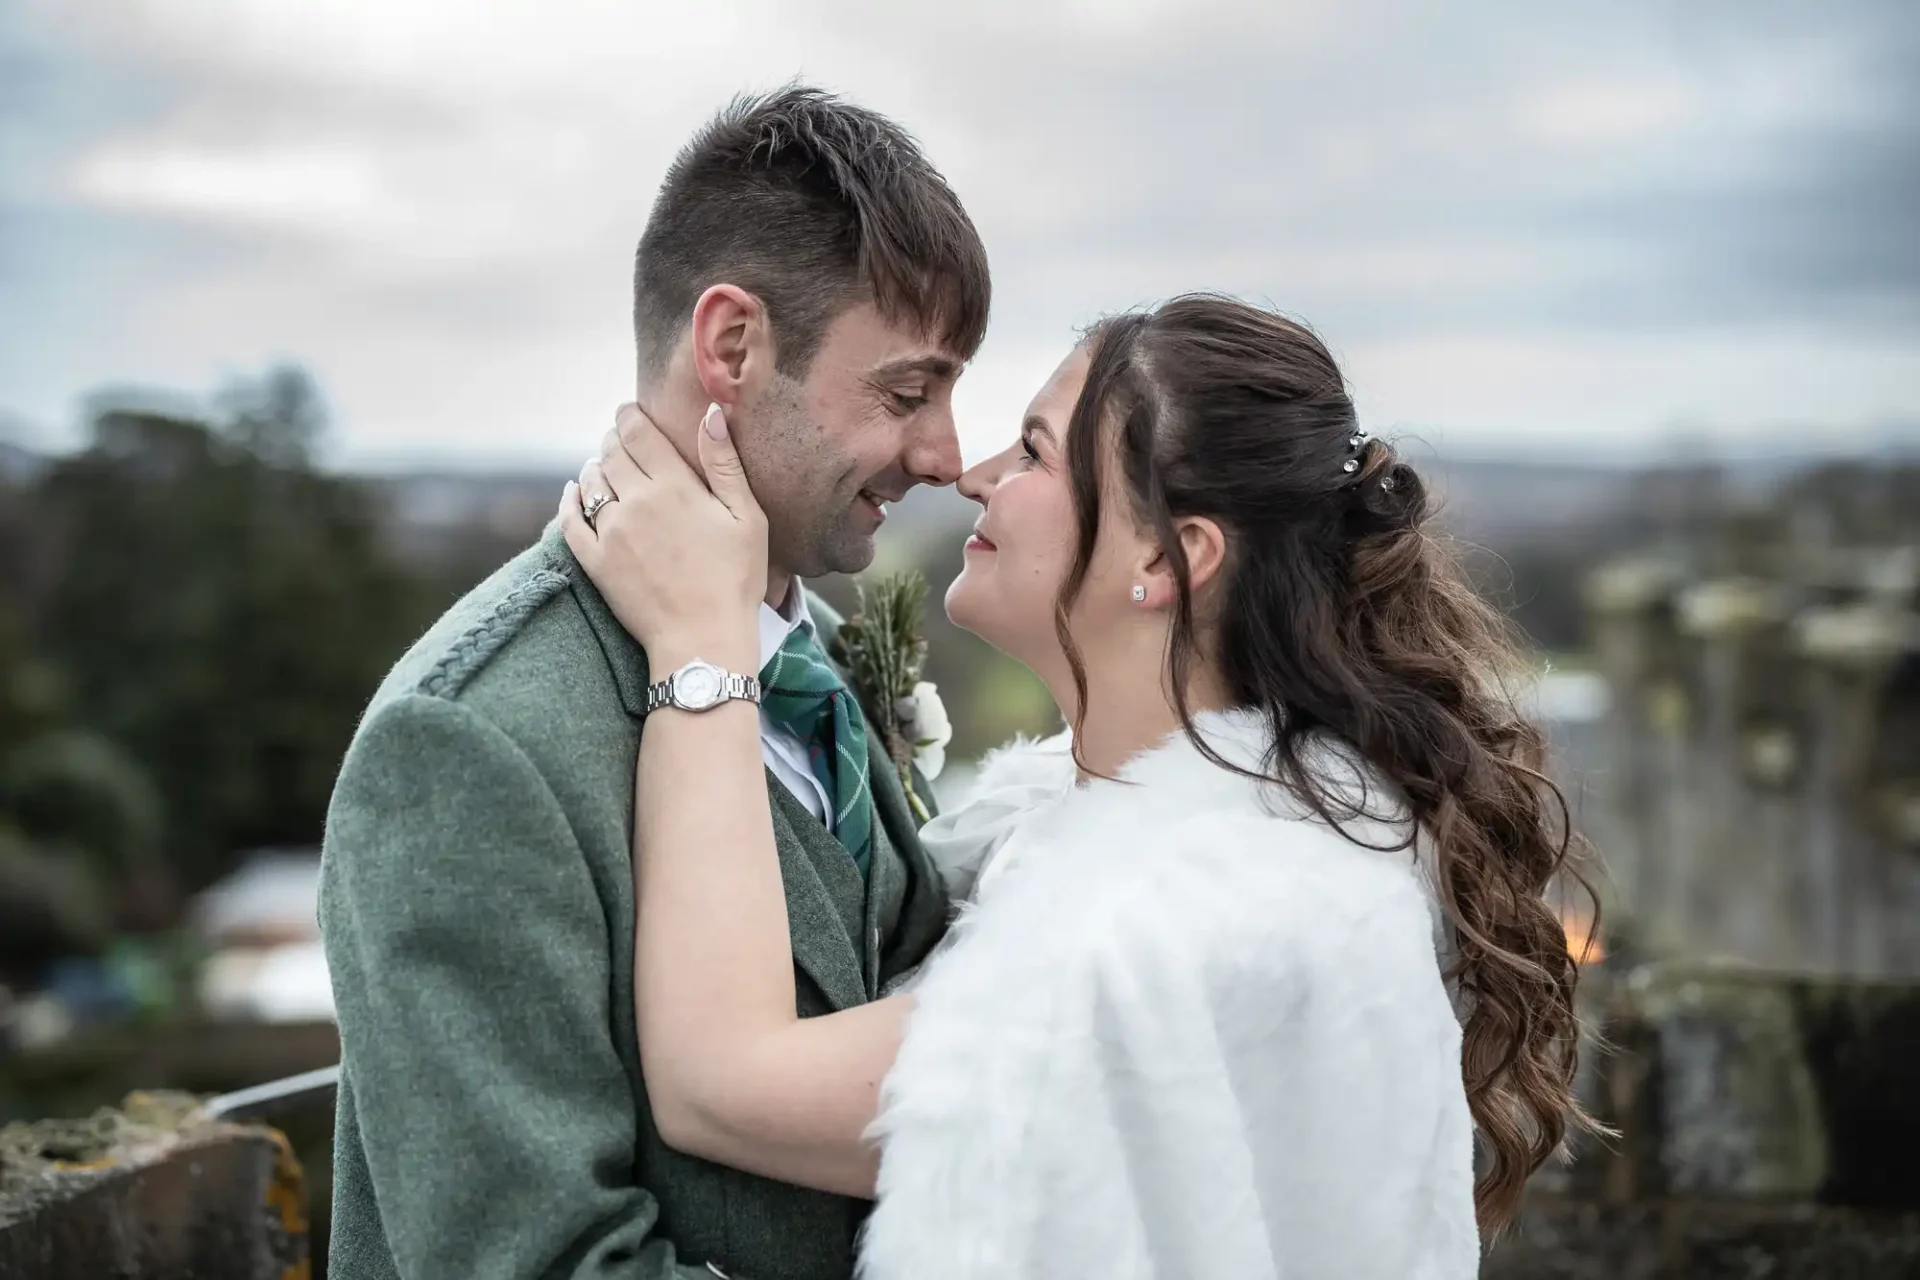 wedding photographer at Dundas Castle: a couple wearing wedding attire gazes into each other's eyes and smiles, standing outdoors with a blurred natural background. The man wears a gray suit and green tie; the woman wears a white fur shoulder wrap.